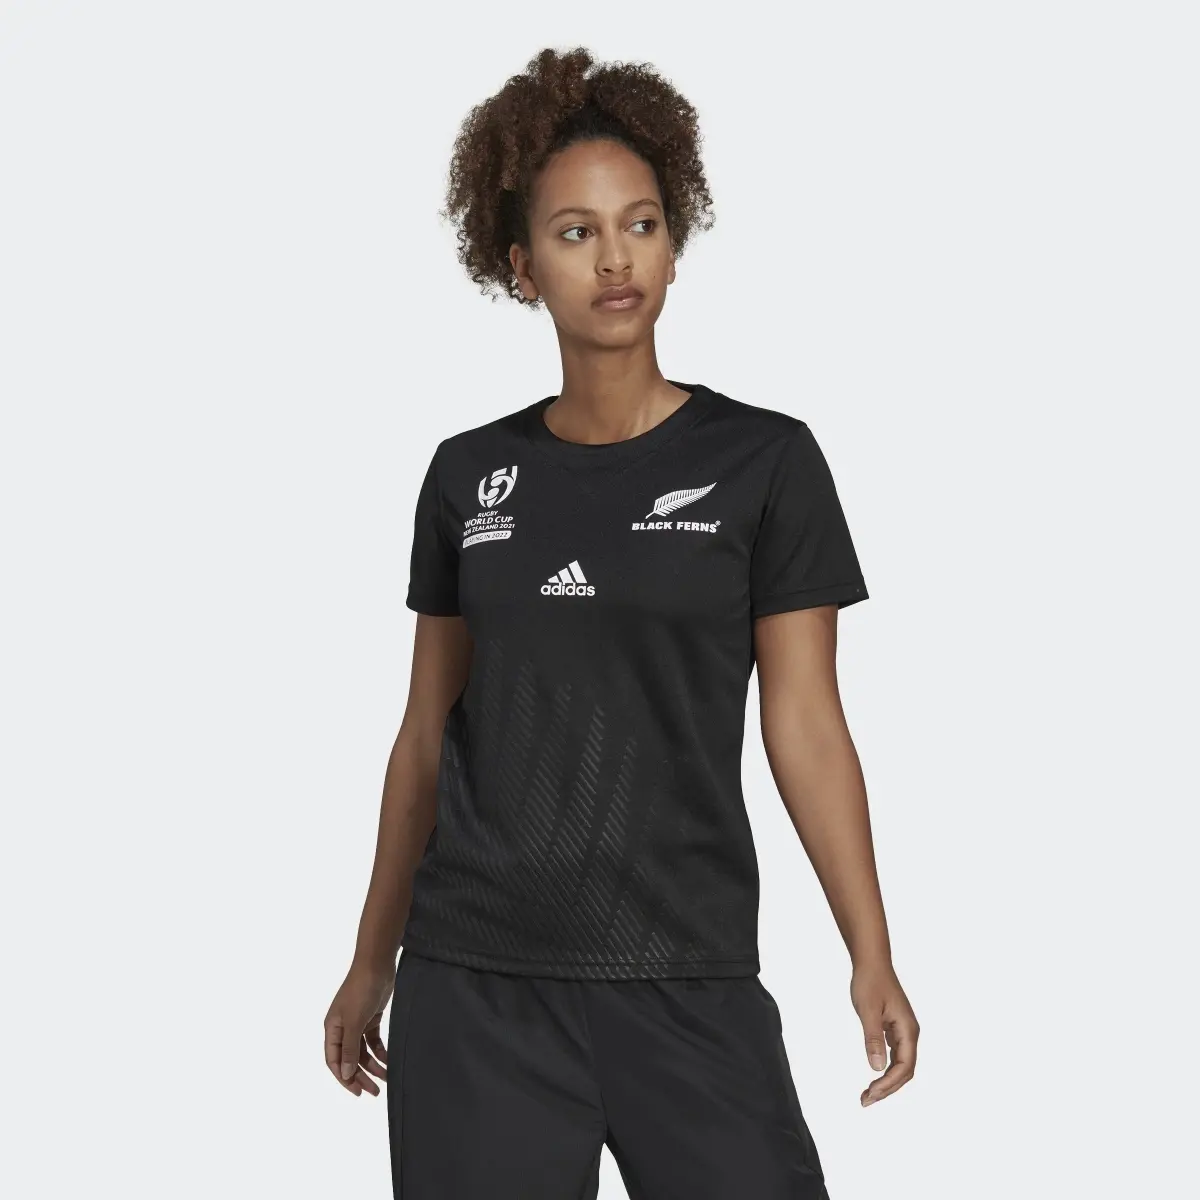 Adidas Black Ferns Rugby World Cup Home Jersey. 2